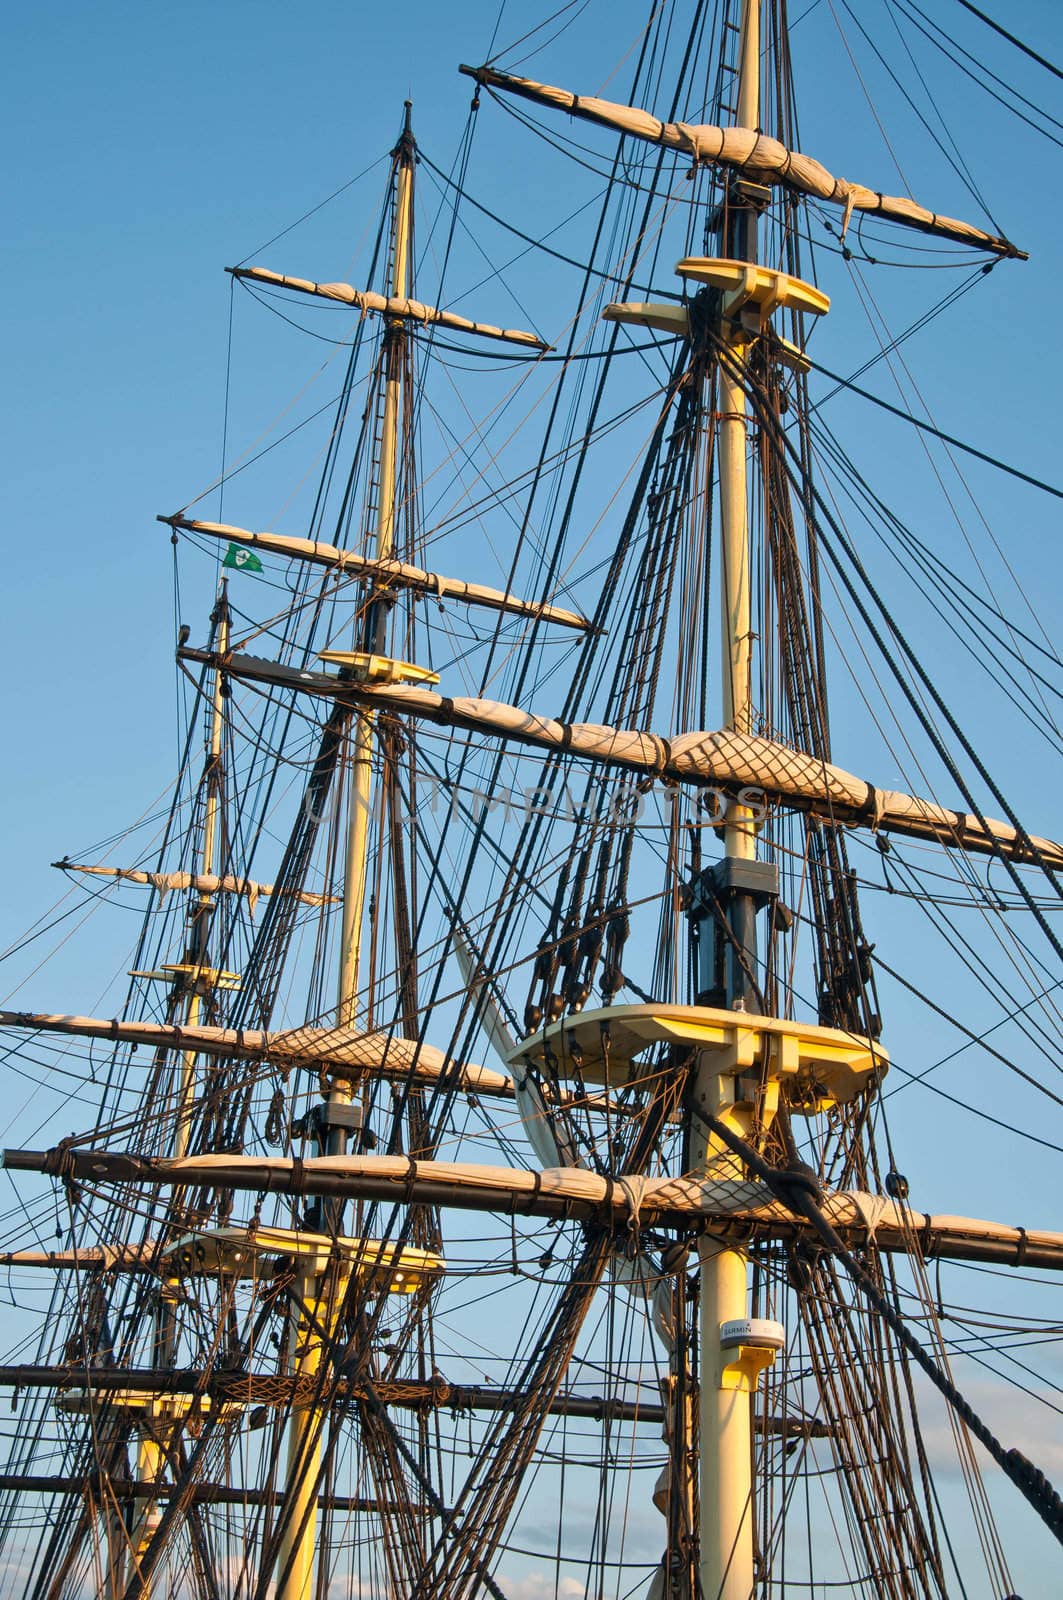 old galleon and old harbor in Salem massachusets Usa